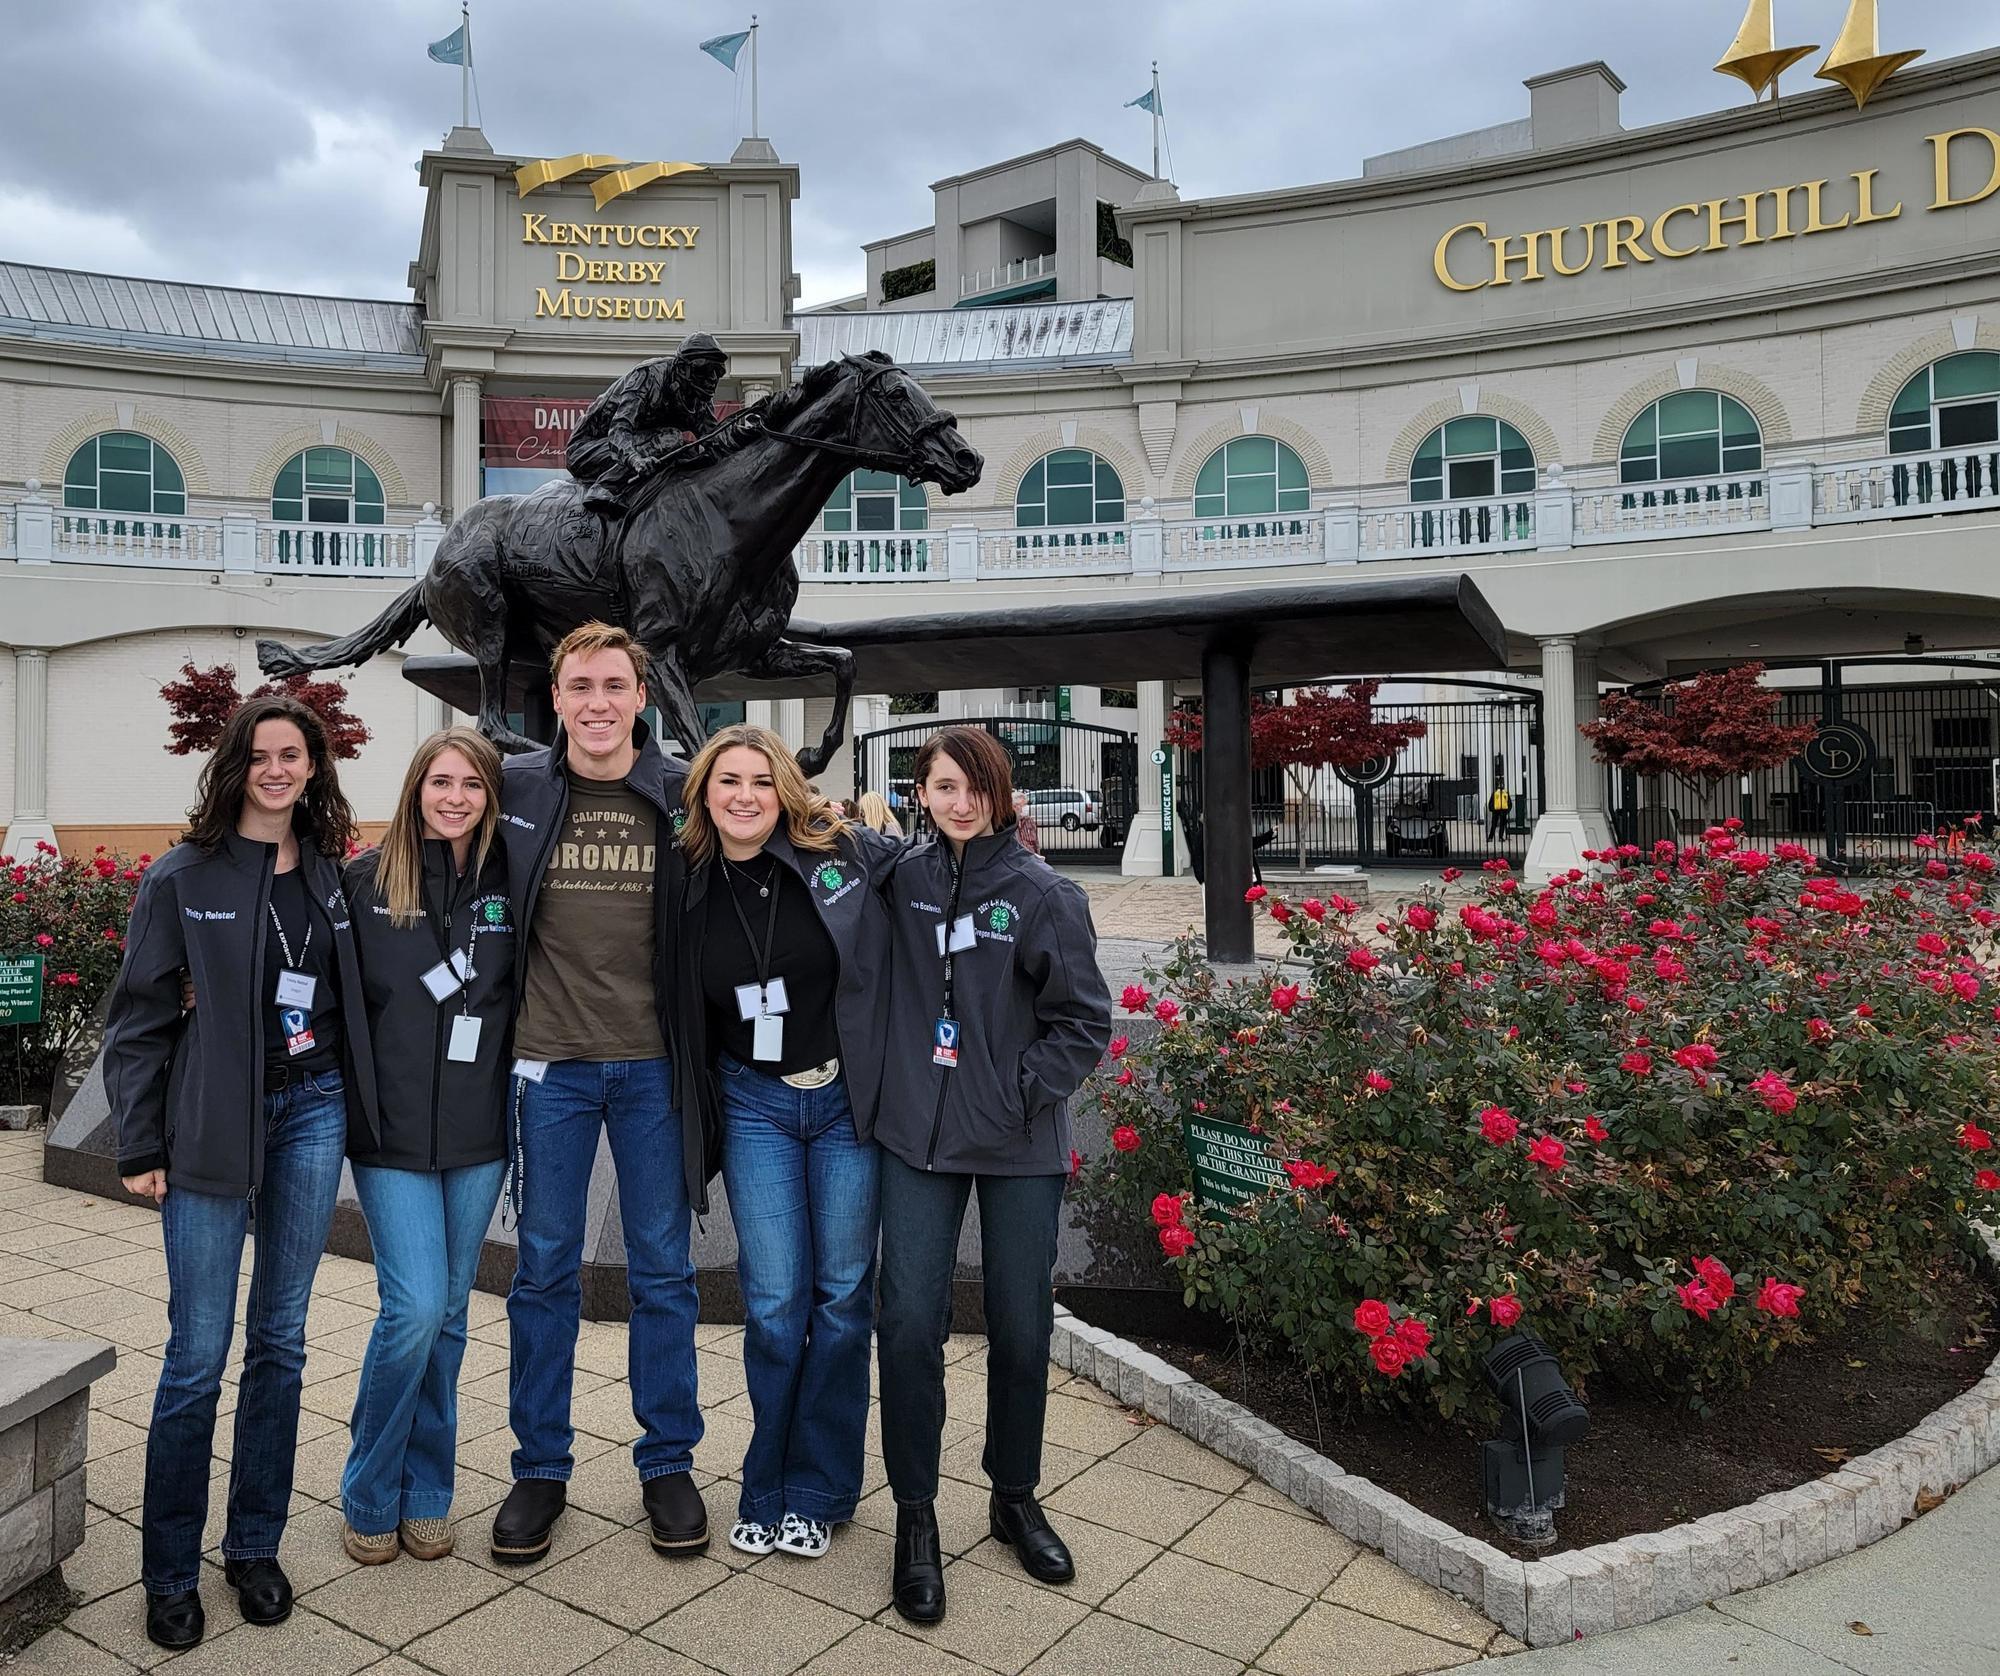 The OSU Extension 4-H avian bowl team poses in front of the Kentucky Derby Museum at Churchill Downs in Louisville, Ky.